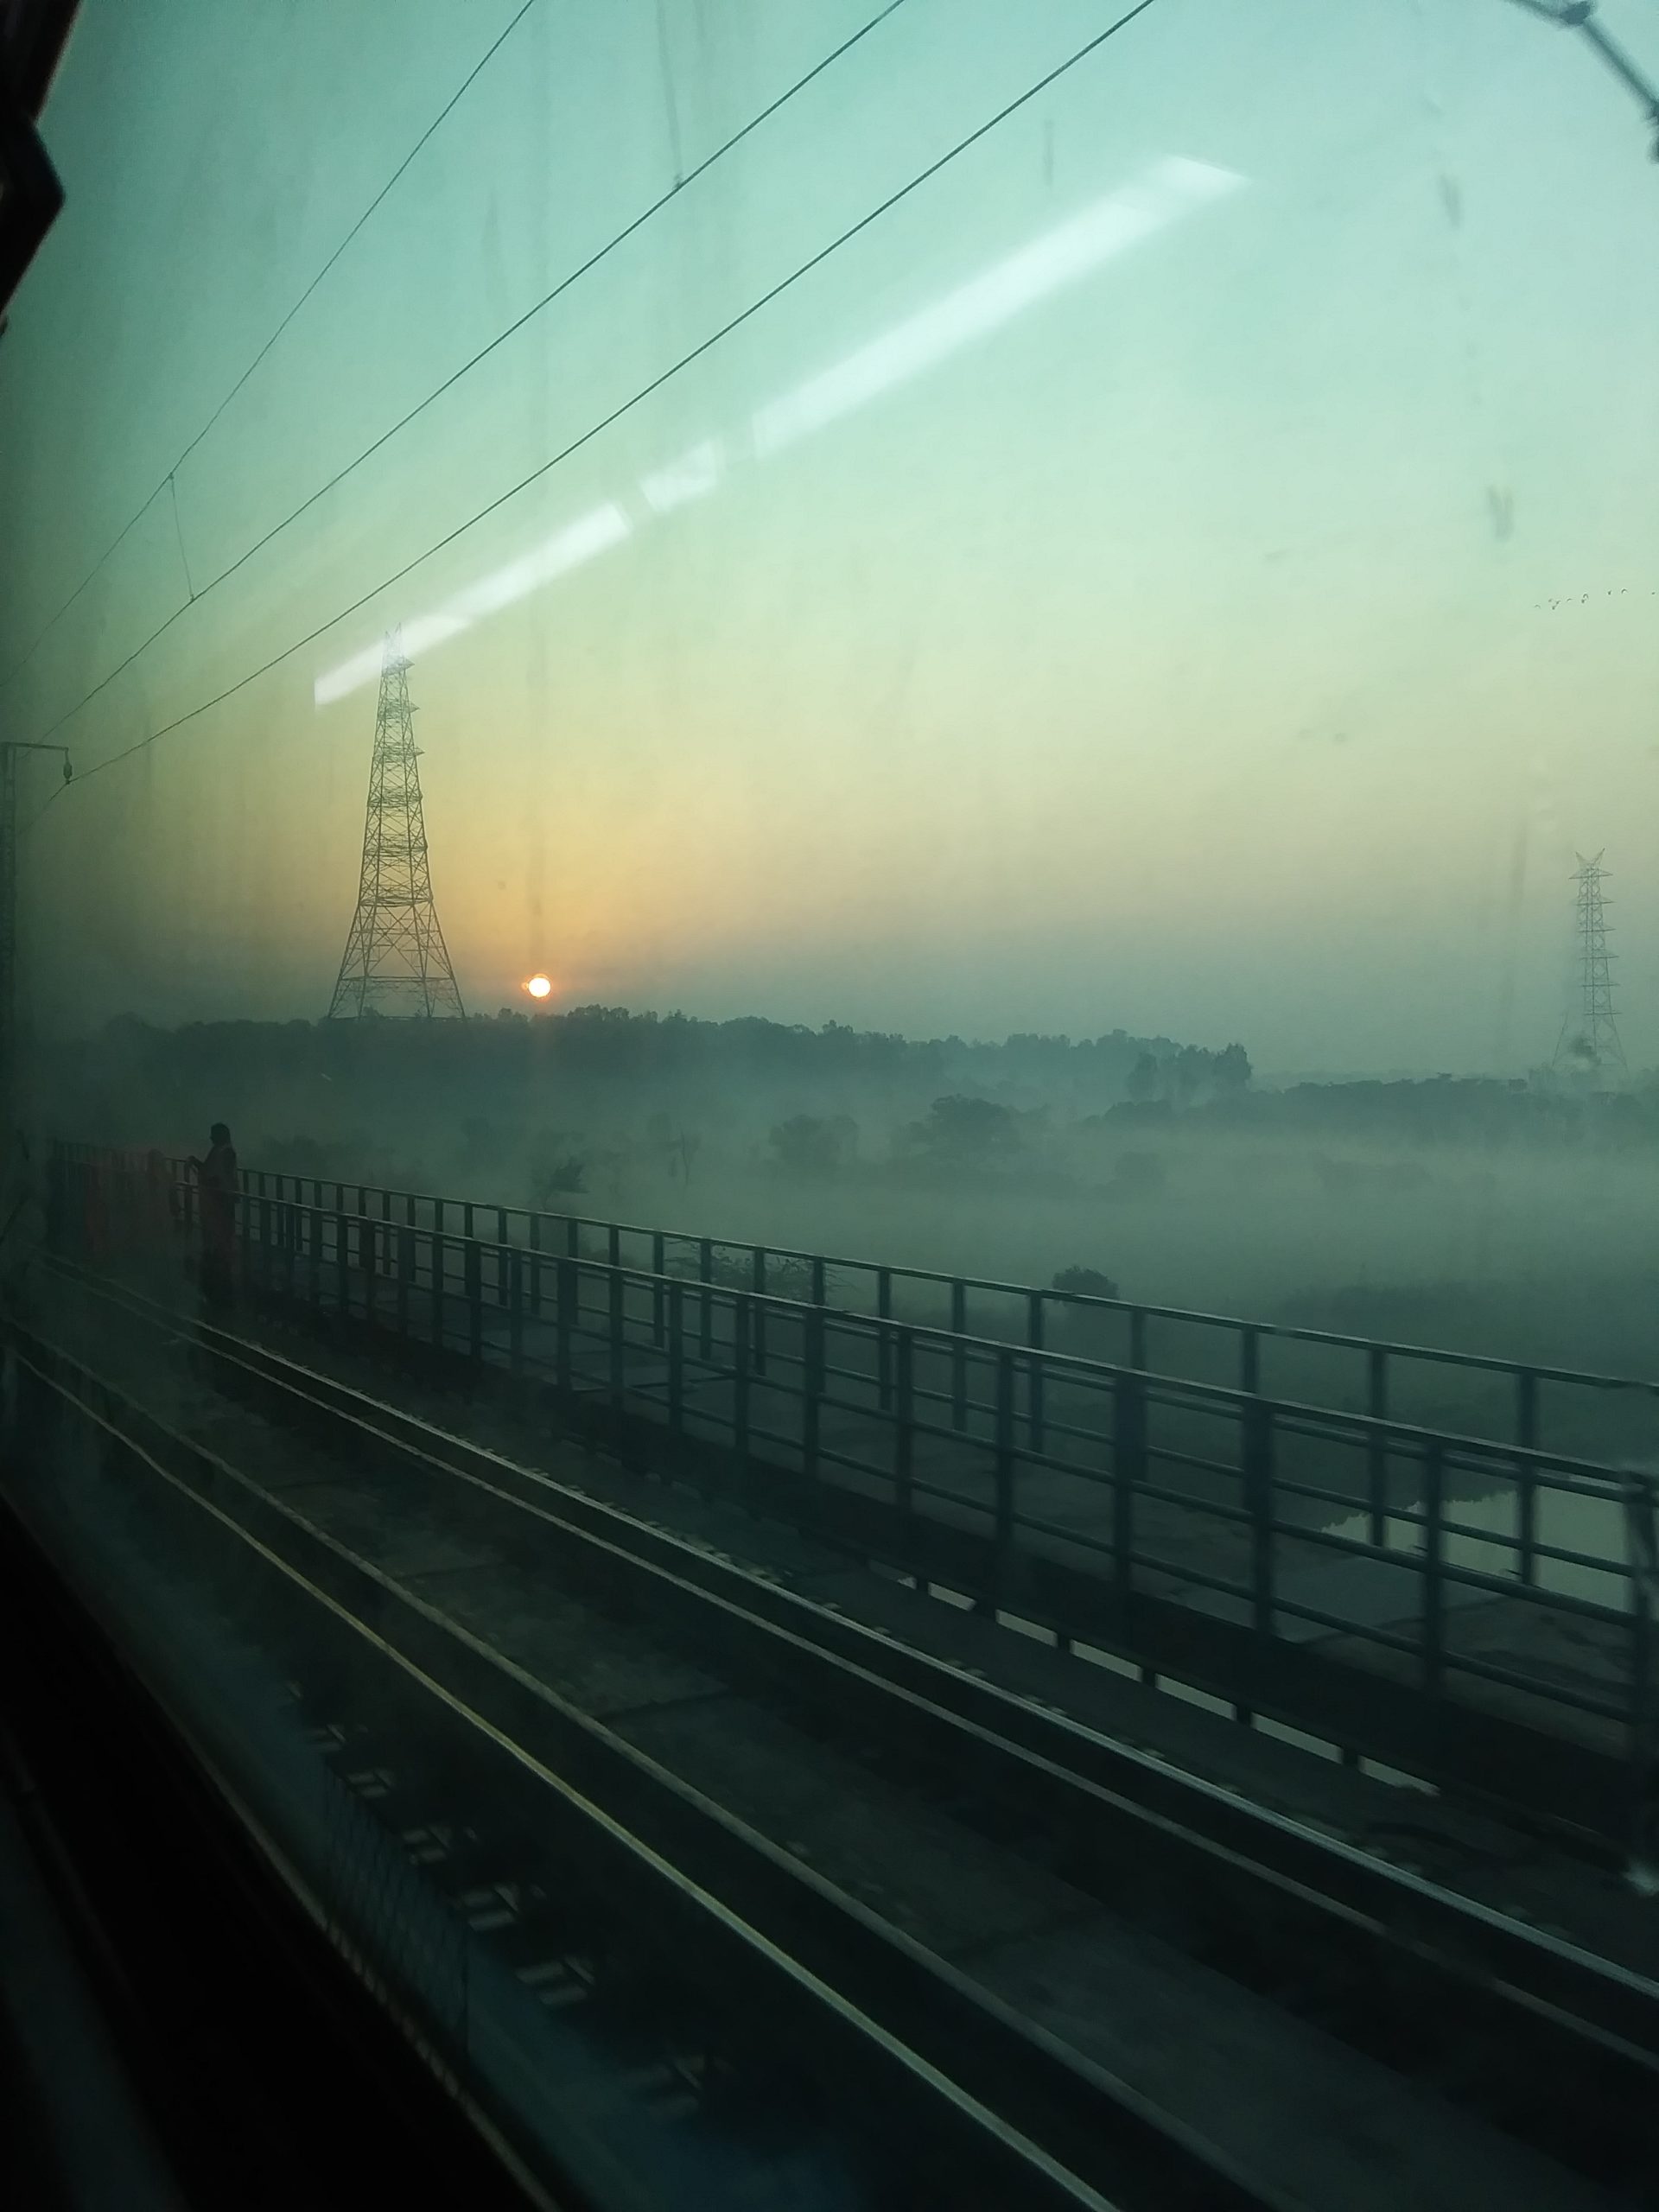 Image from the train in India